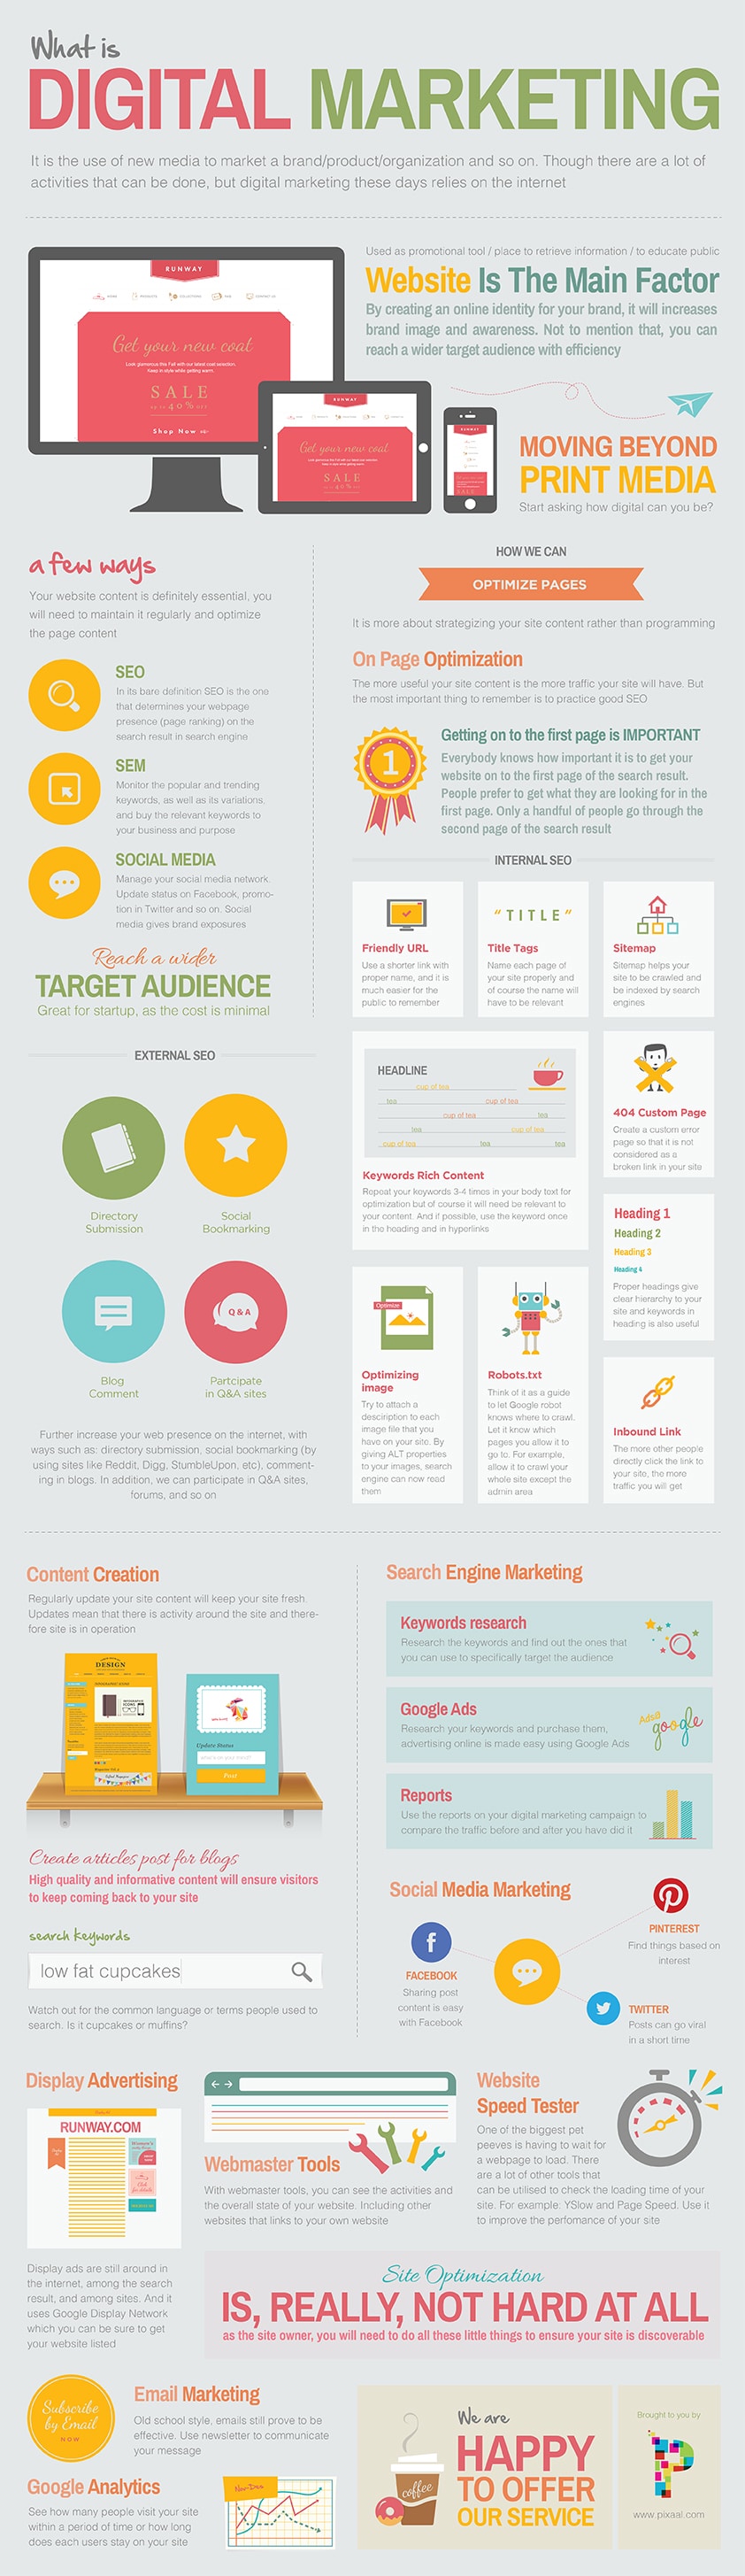 guide-to-digital-marketing-infographic